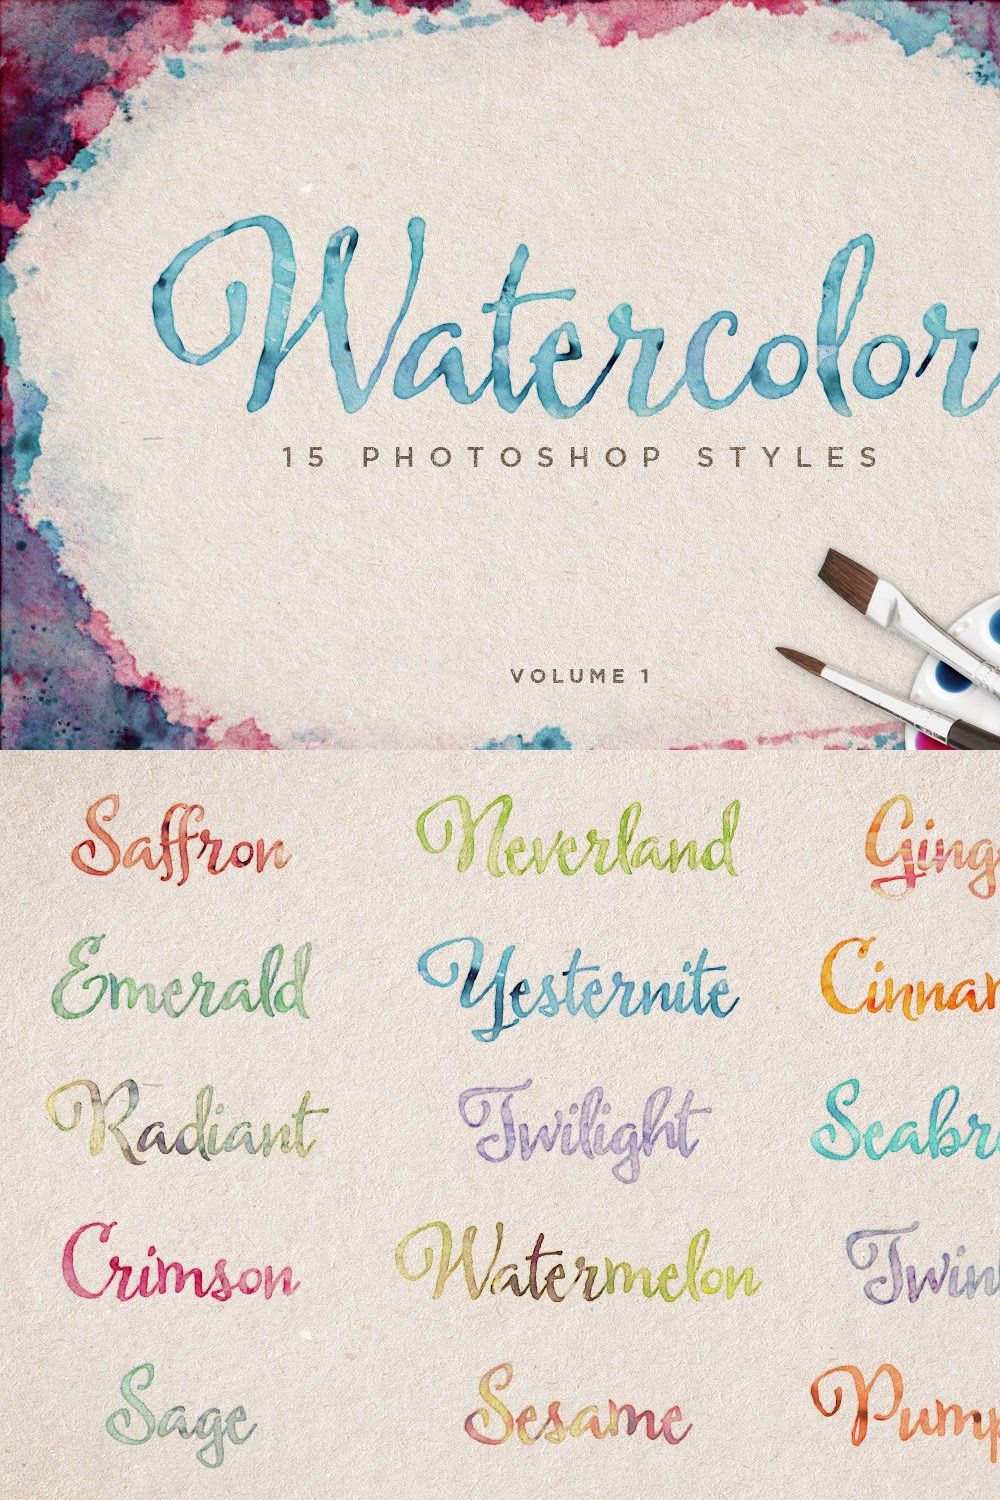 Watercolor Photoshop Styles Volume 1 pinterest preview image.